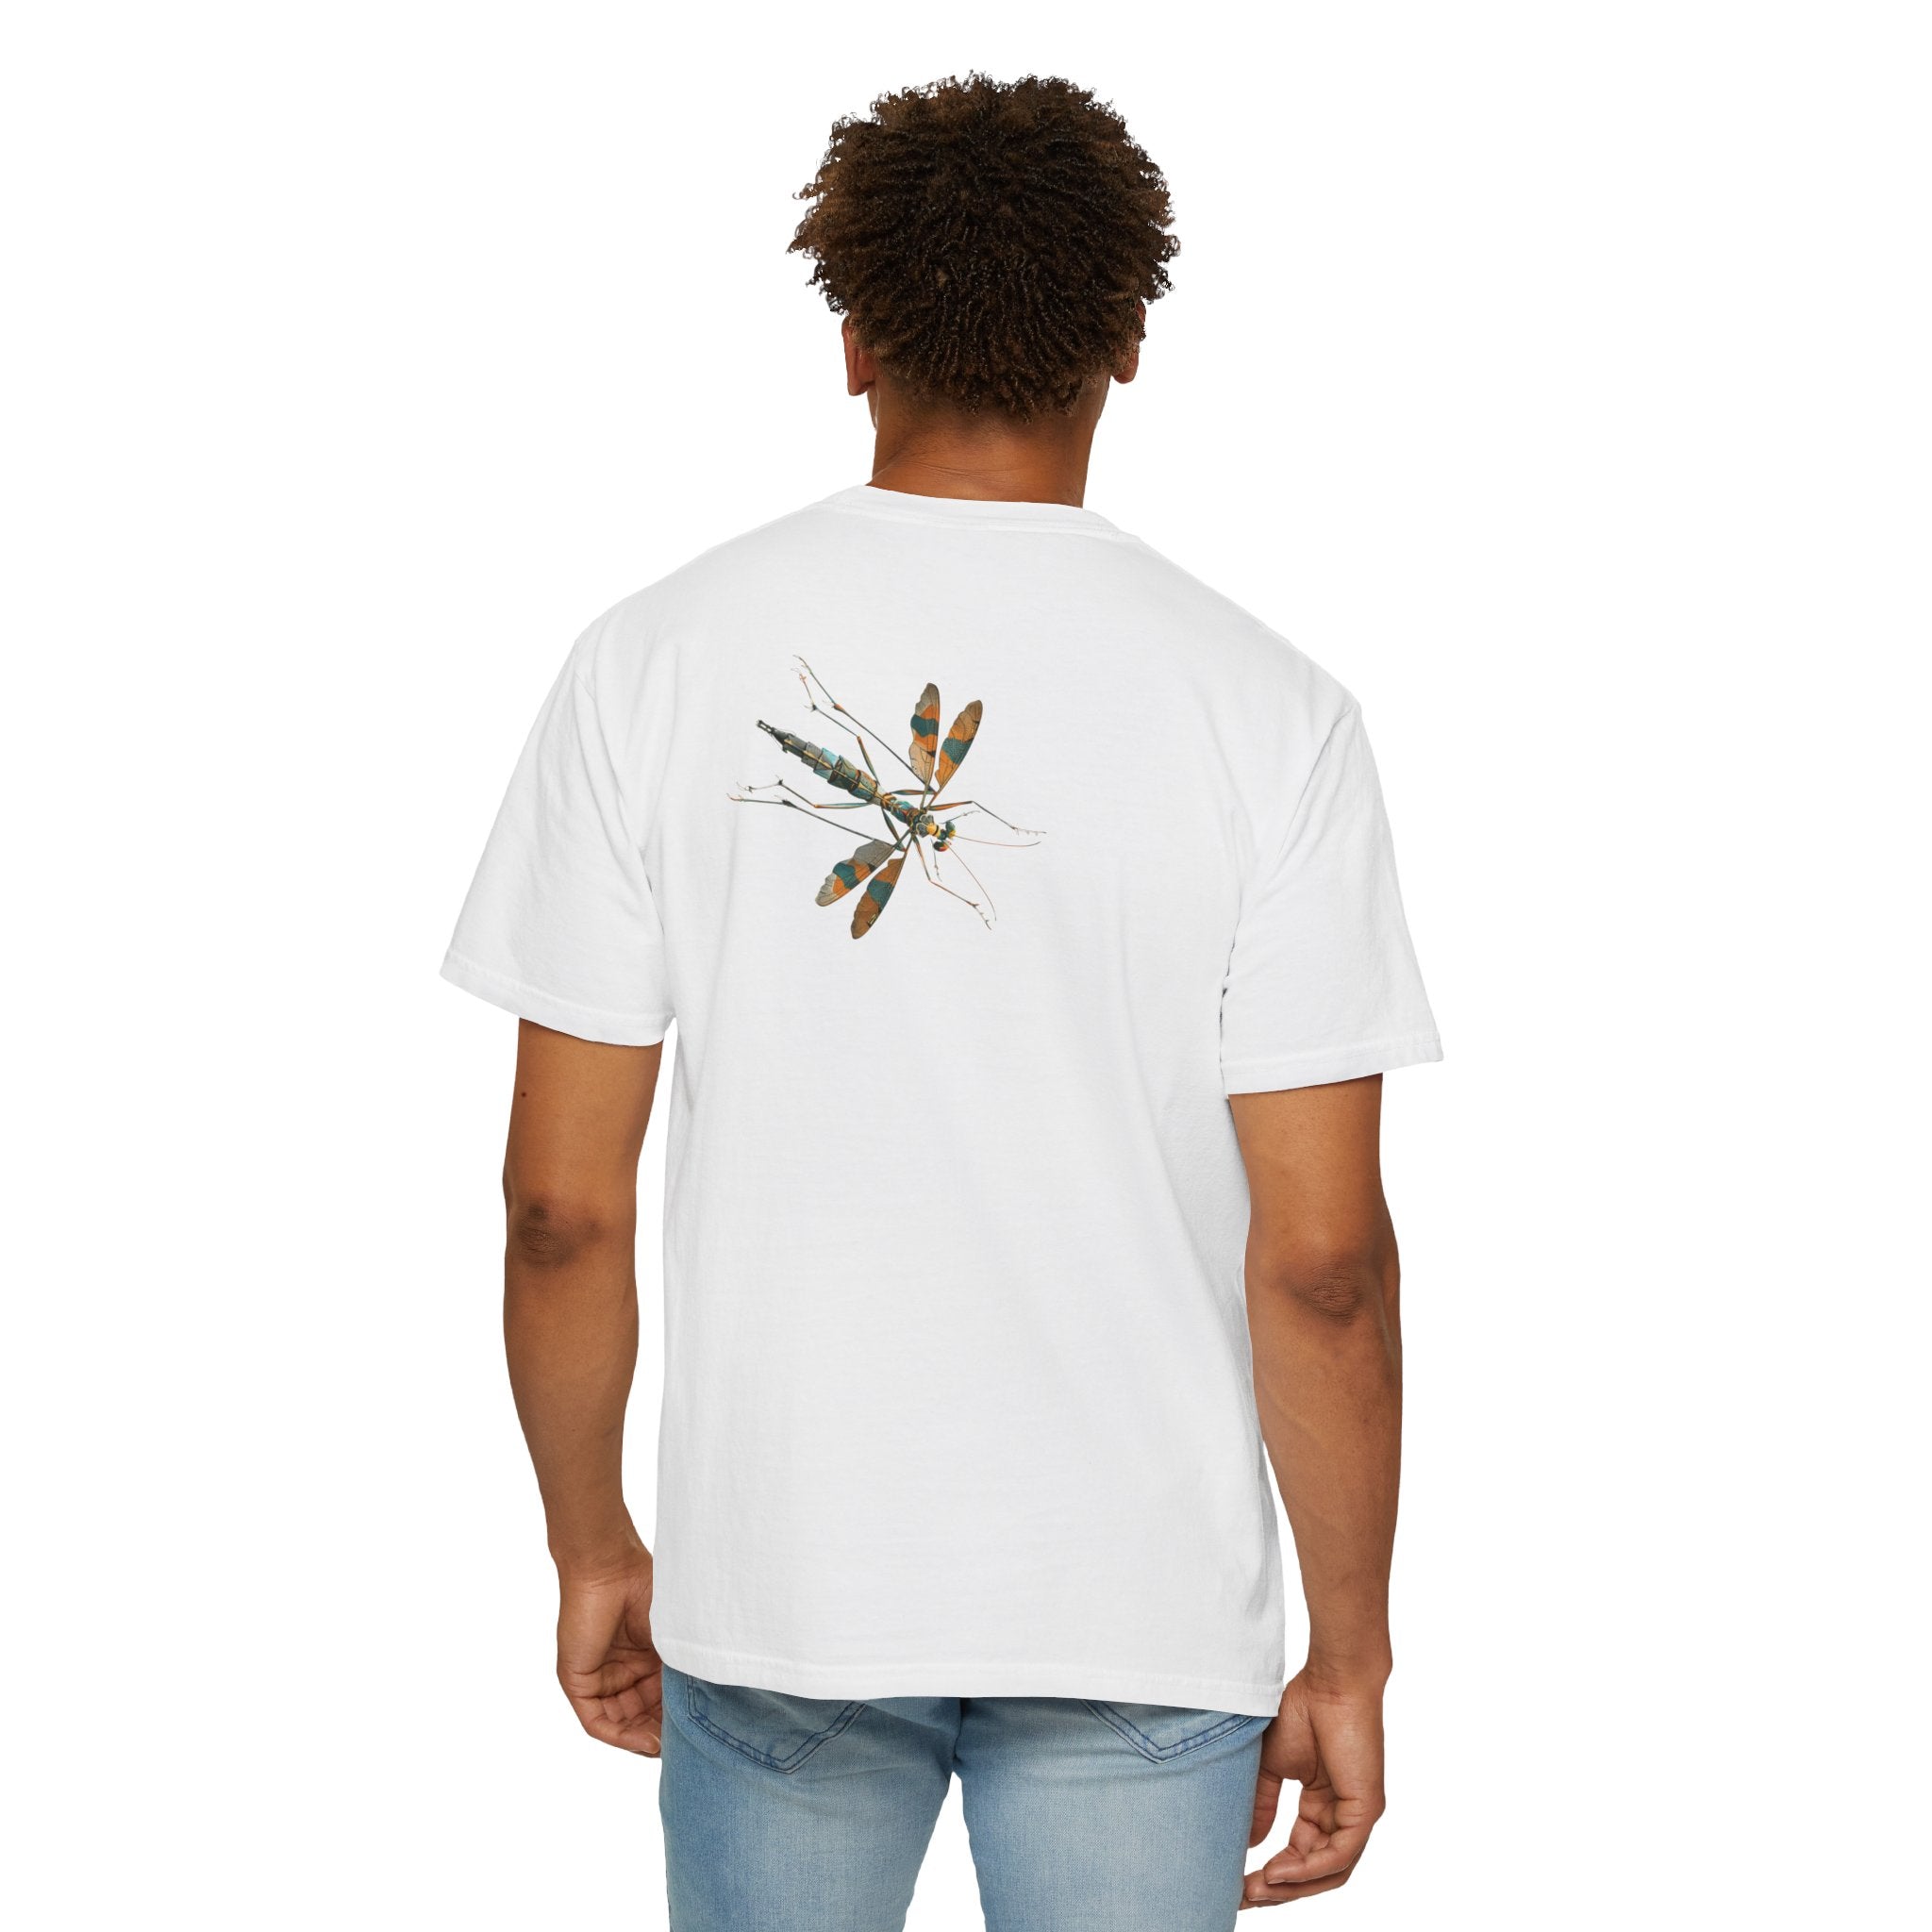 The image showcases a stylish unisex garment-dyed t-shirt in a soft, appealing color. The back of the shirt features a highly detailed, lifelike bug illustration that looks poised to crawl away. The front remains plain, directing all attention to the joke played on the unsuspecting viewers behind the wearer